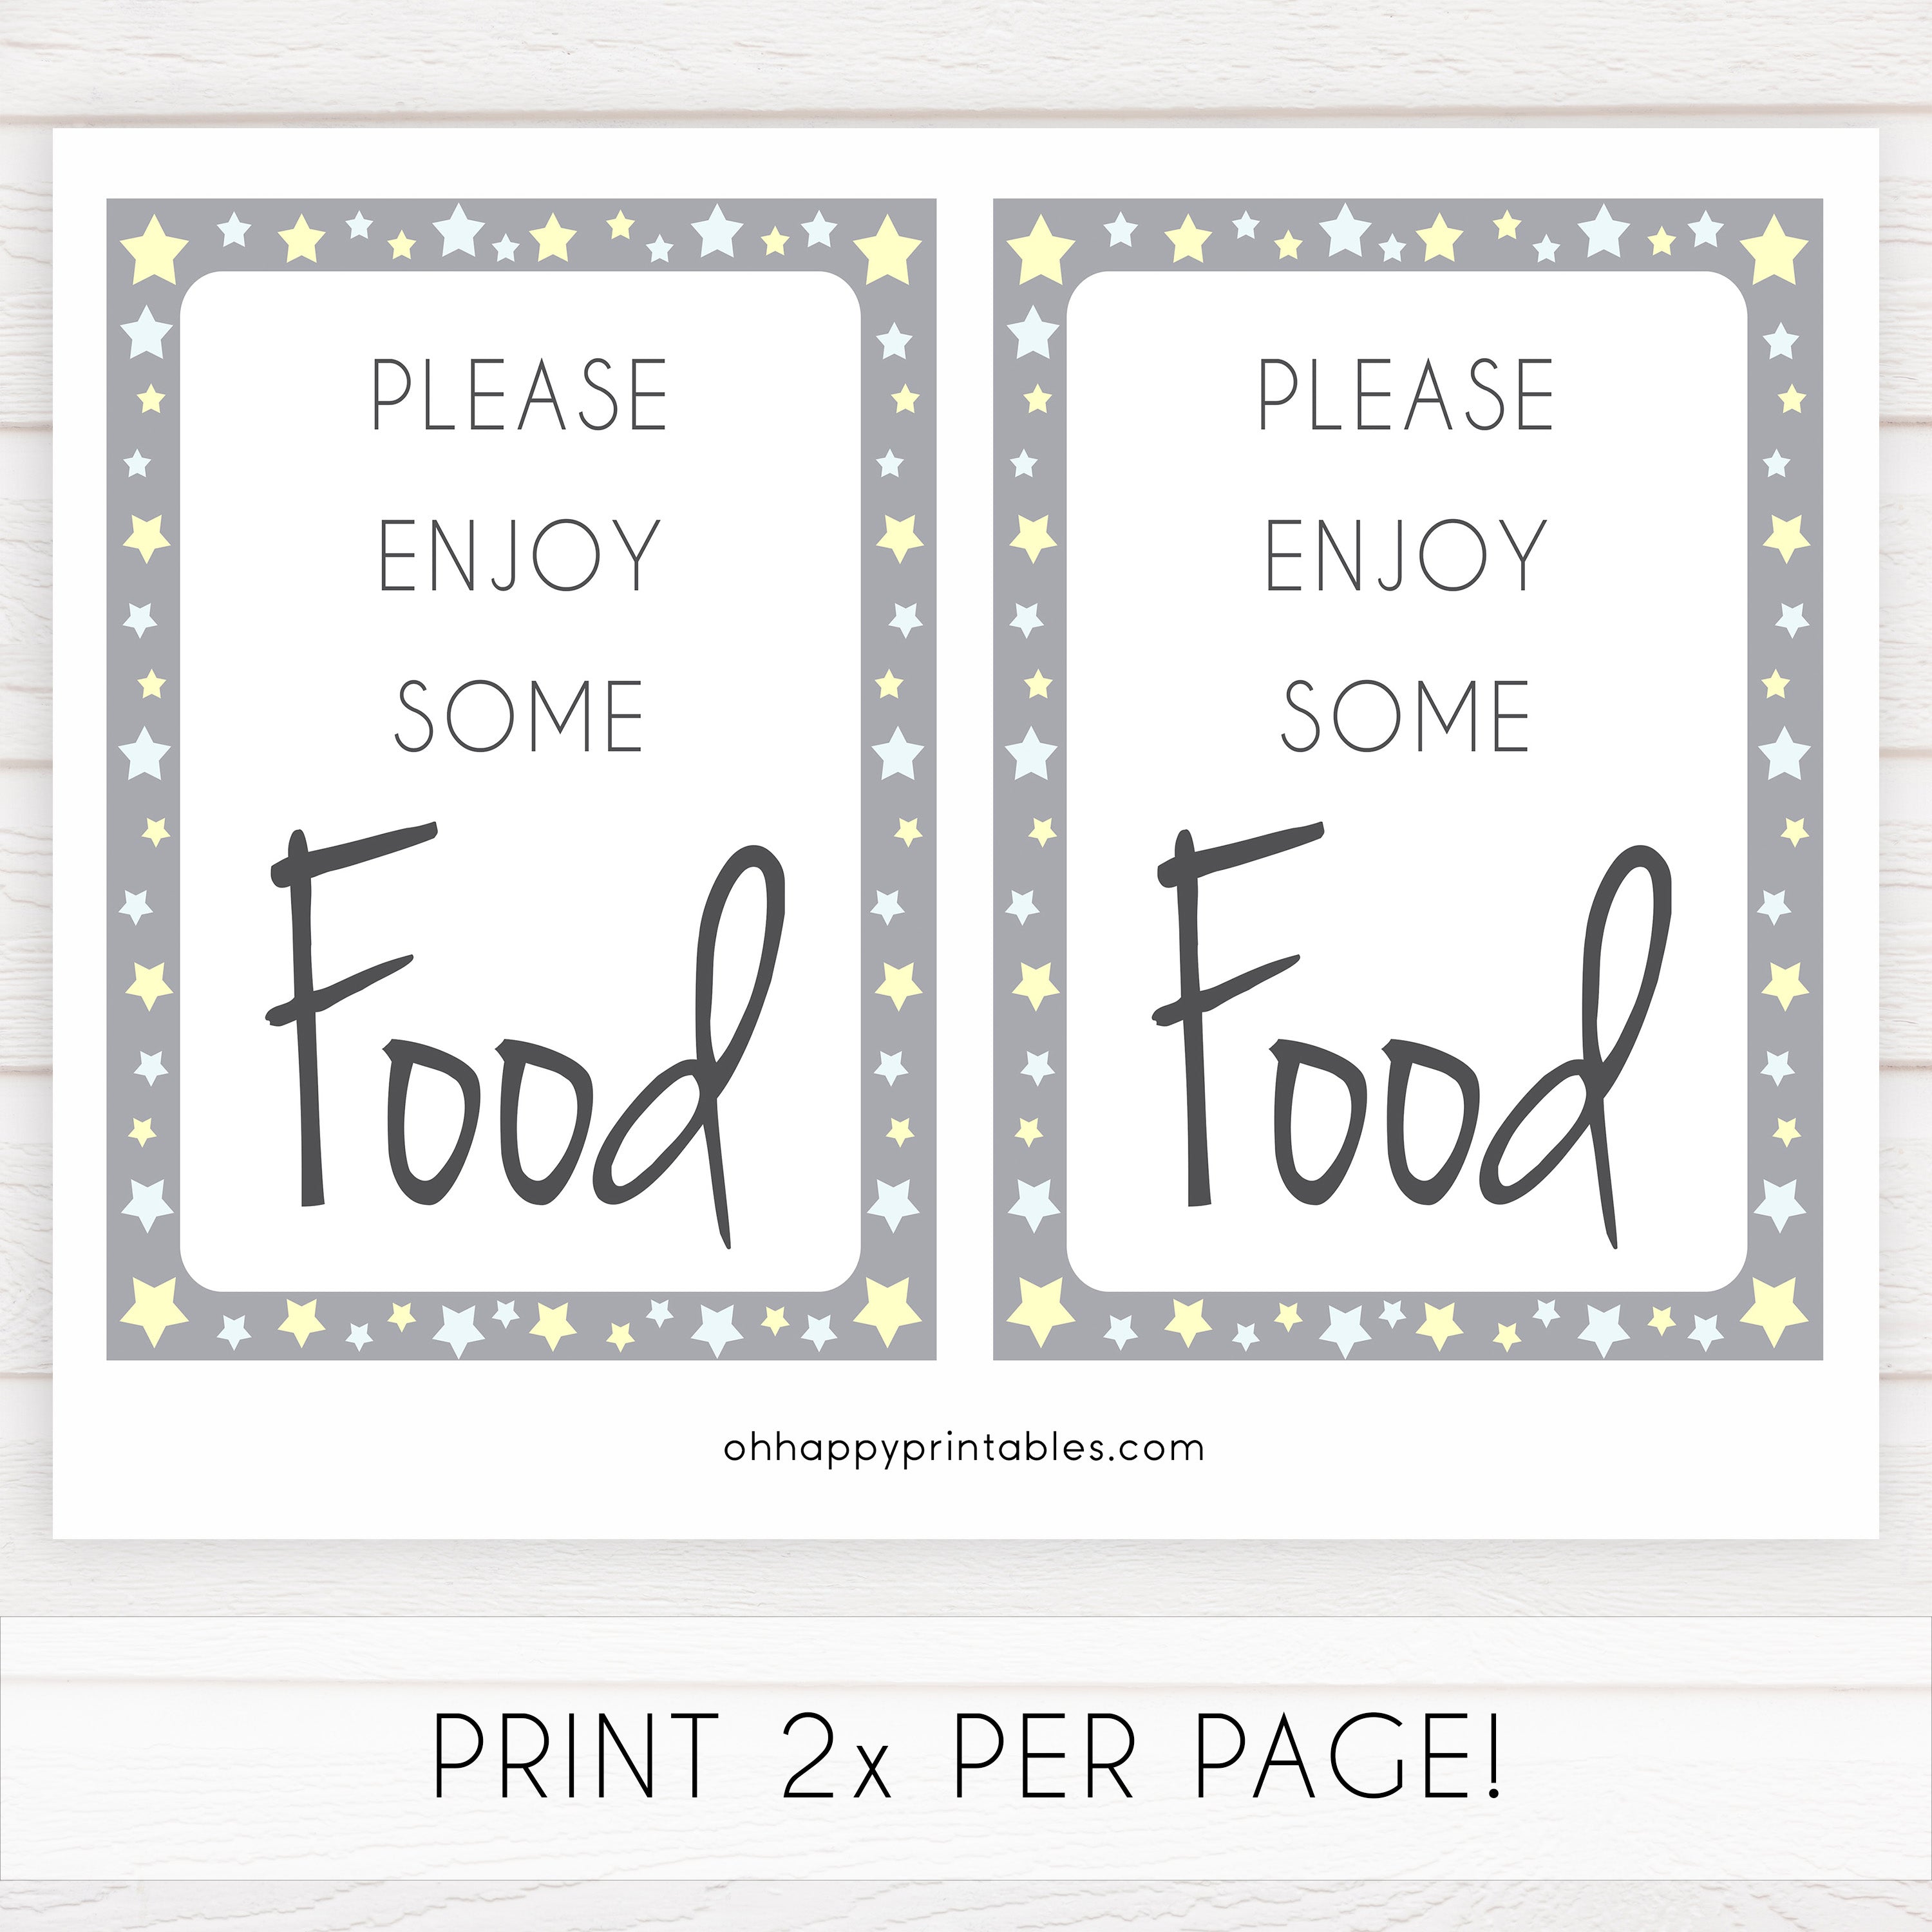 Printable baby signs, food baby sign, yellow and grey stars, printable baby shower signs, top baby shower decor, baby printable decor